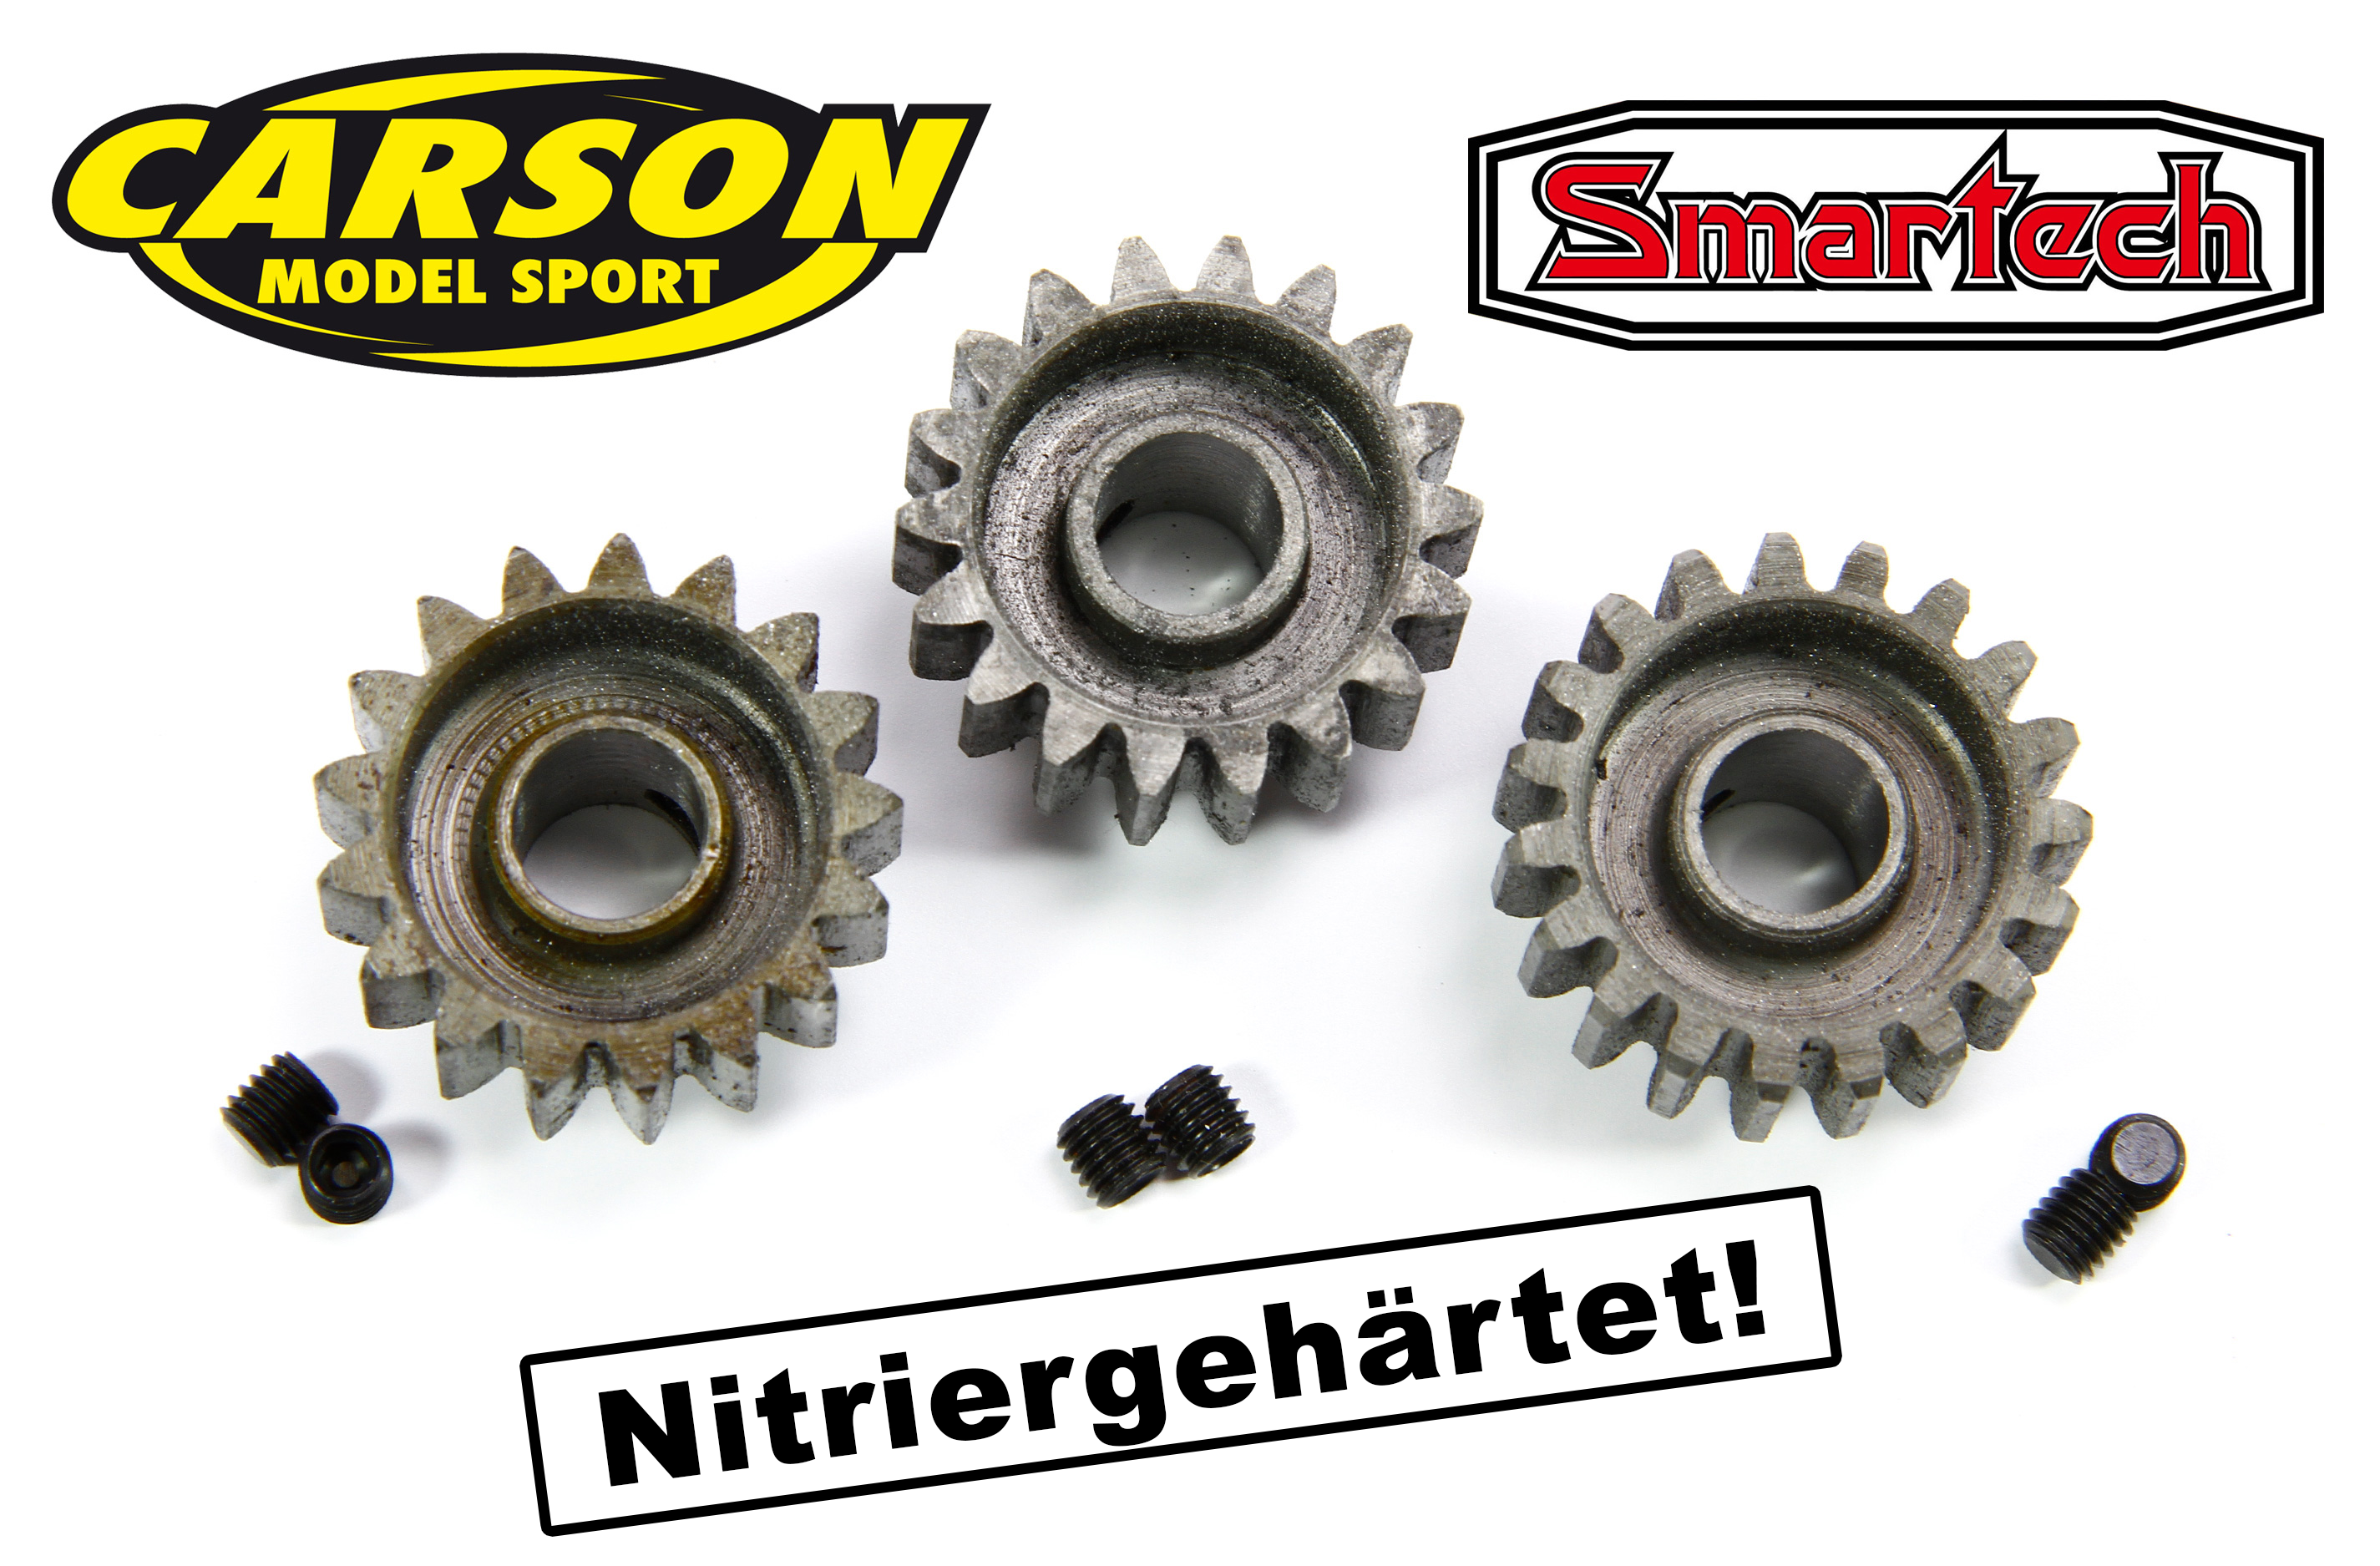 HT-Steel pinions for Carson / Smartech 2WD offroad cars